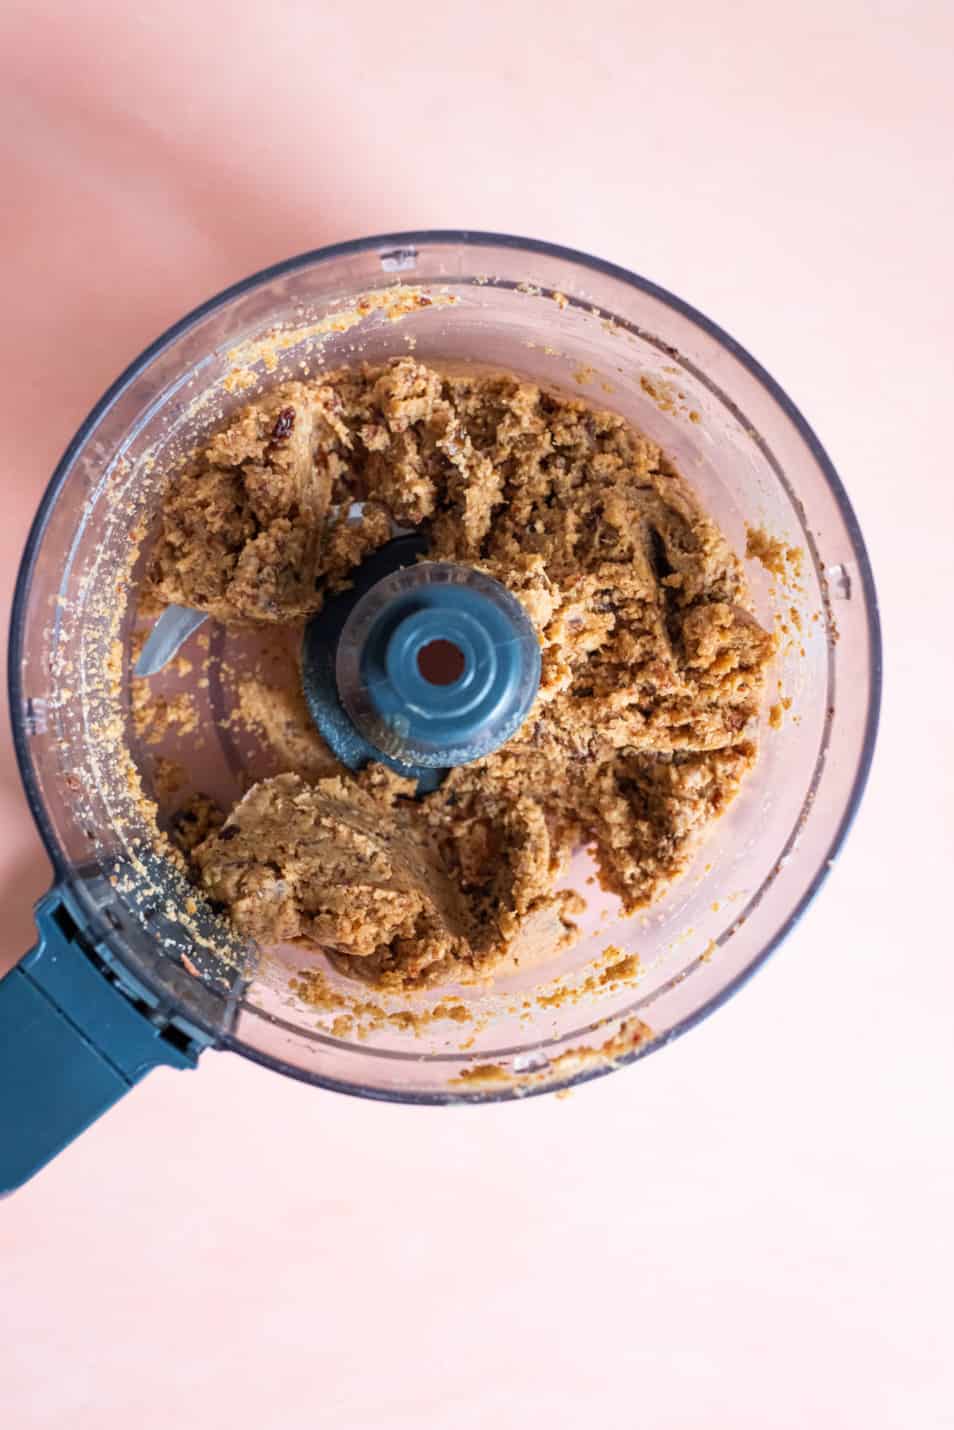 Peanut butter and dates blended together in a food processor